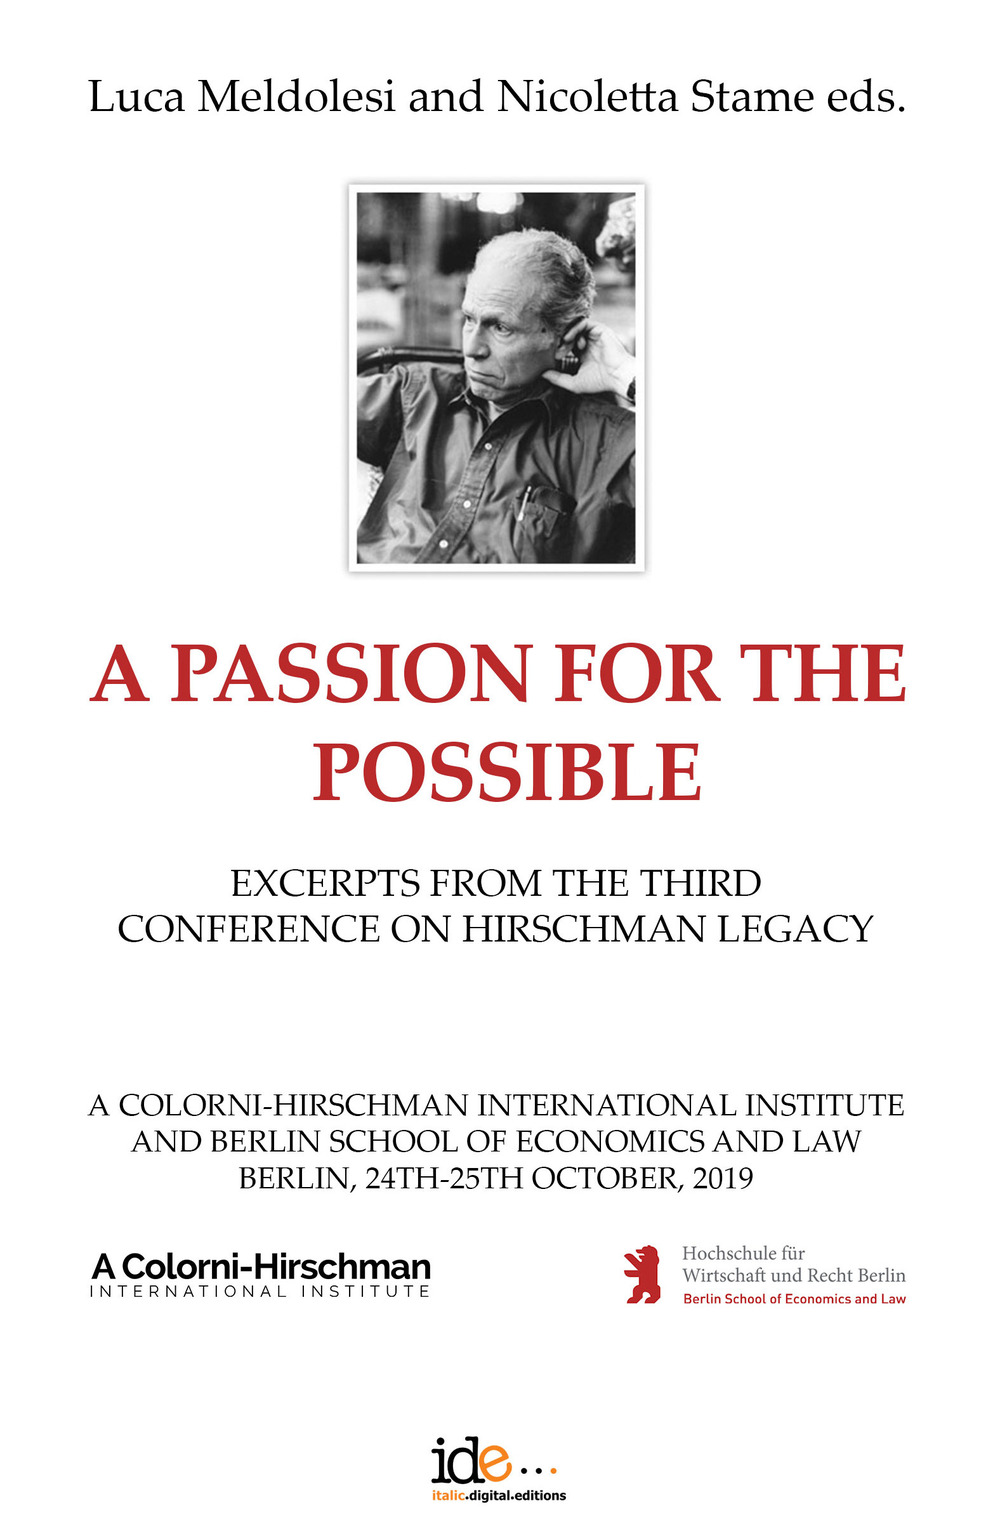 A passion for the possible. Excerpts from the third Conference on Hirschman legacy